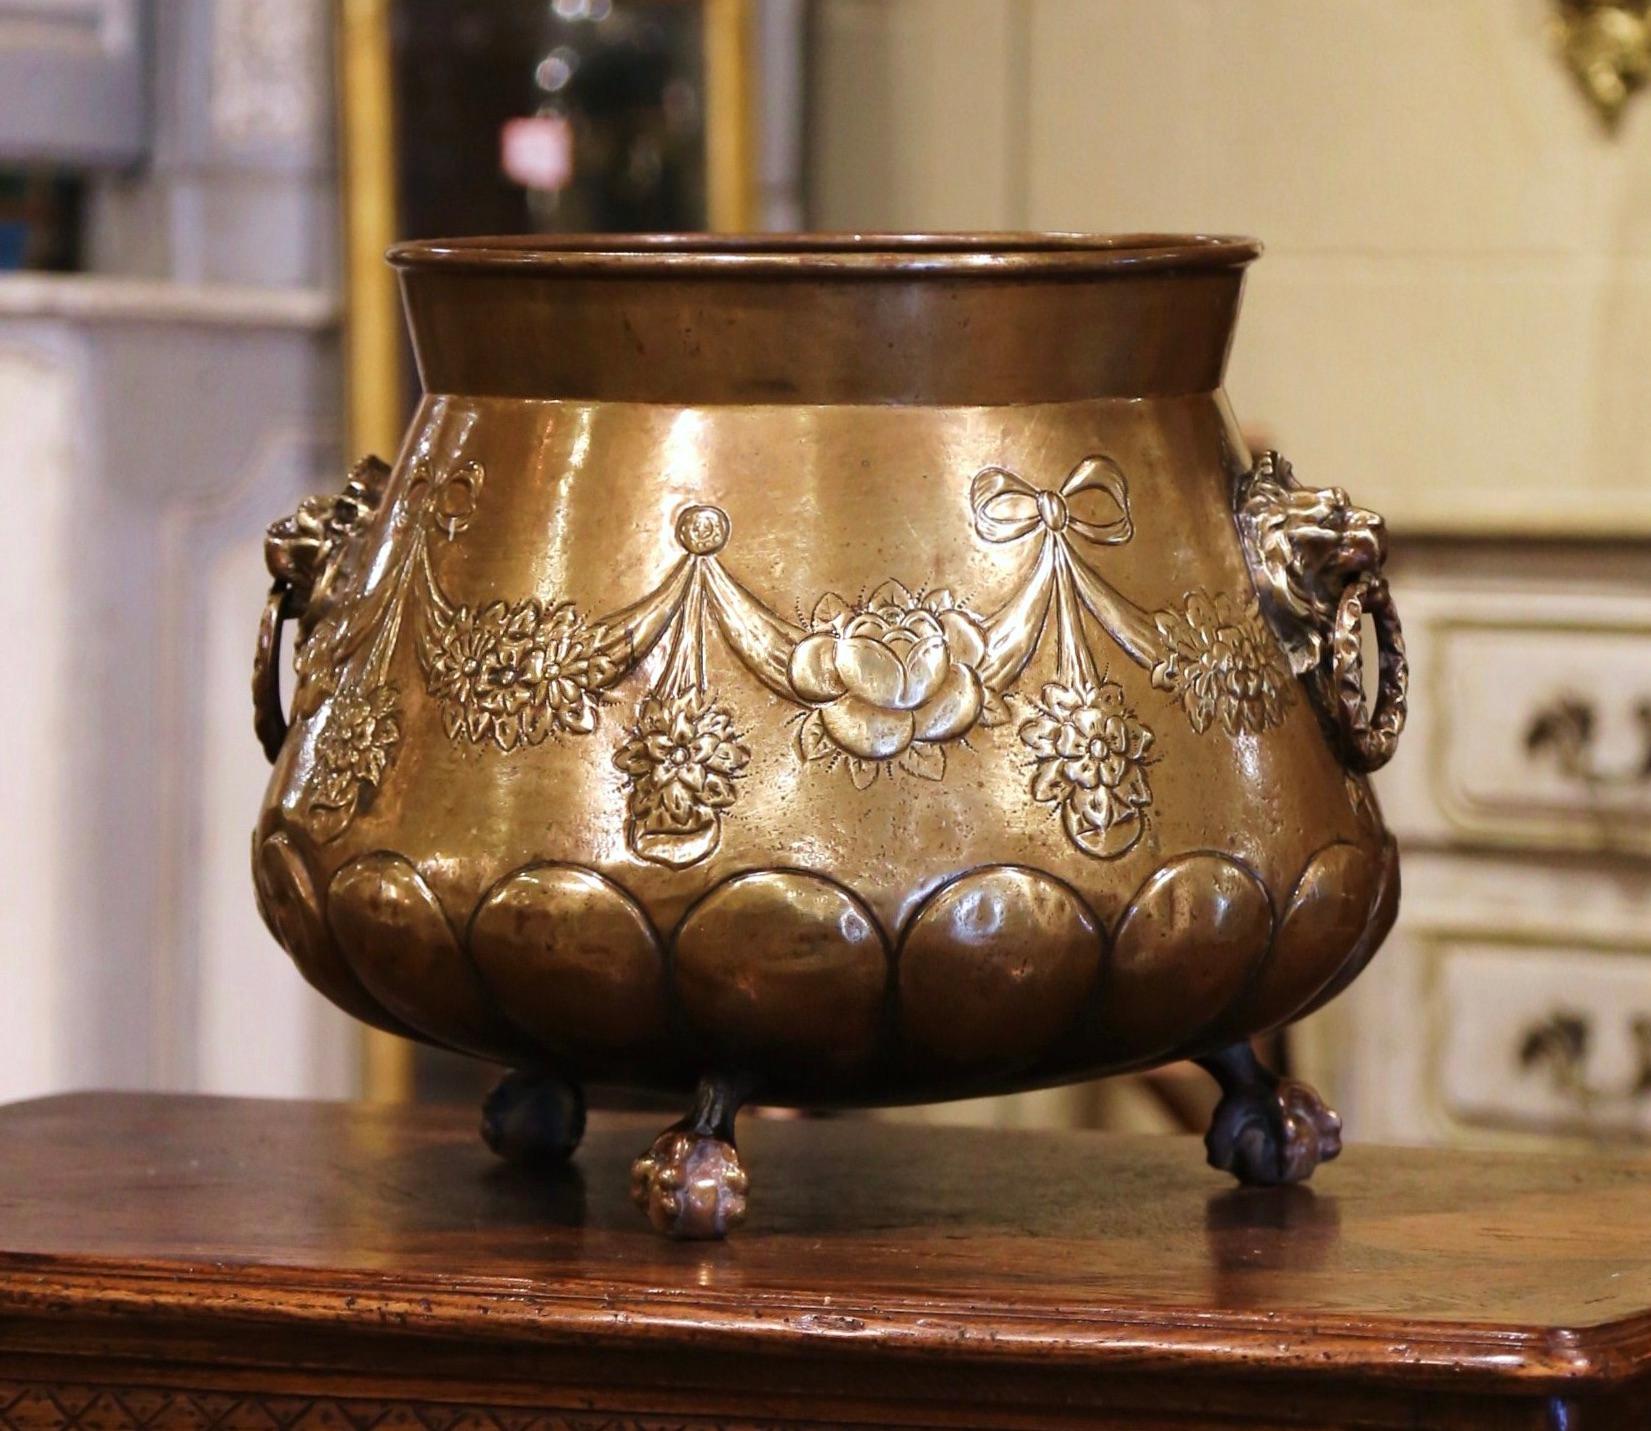 Napoleon III 19th Century French Brass Cache-Pot with Lion Head Handles and Repousse Decor